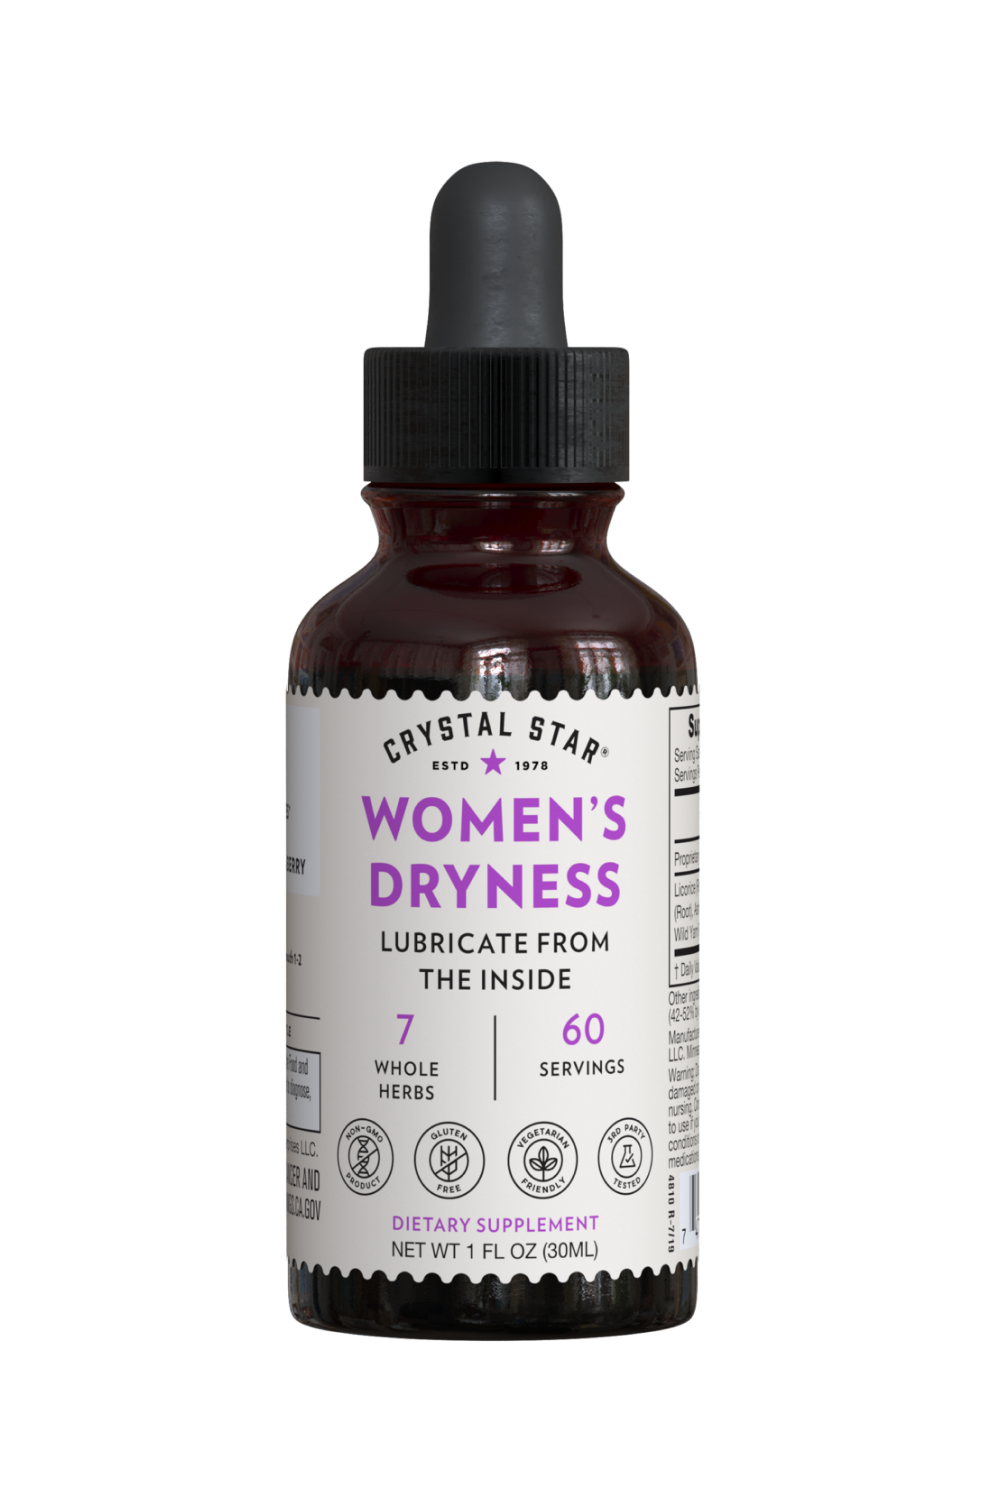 Crystal Star Women's Dryness Extract for promoting body fluid production, Front Side